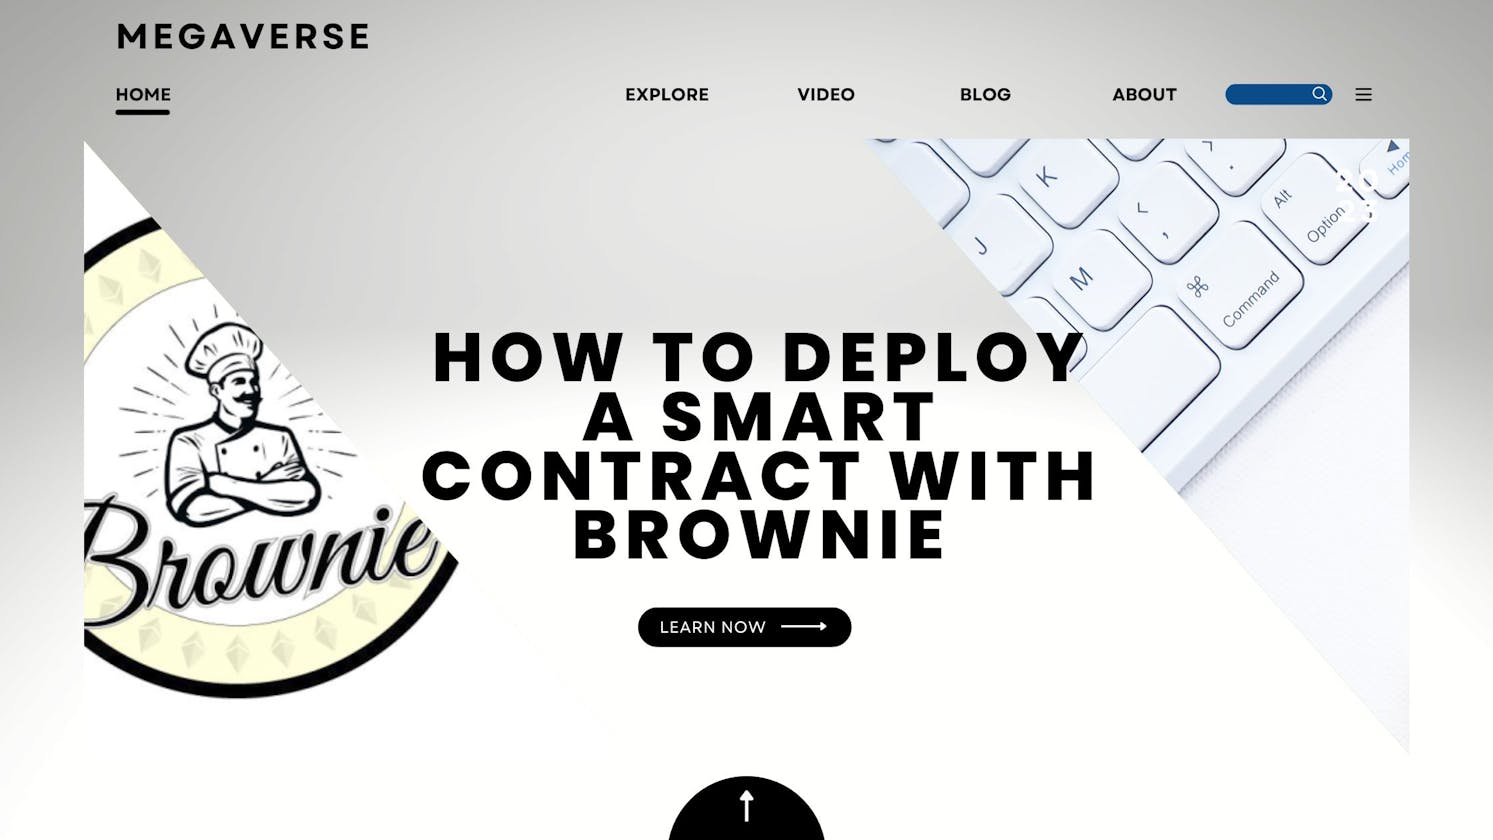 How to deploy a smart contract with Brownie